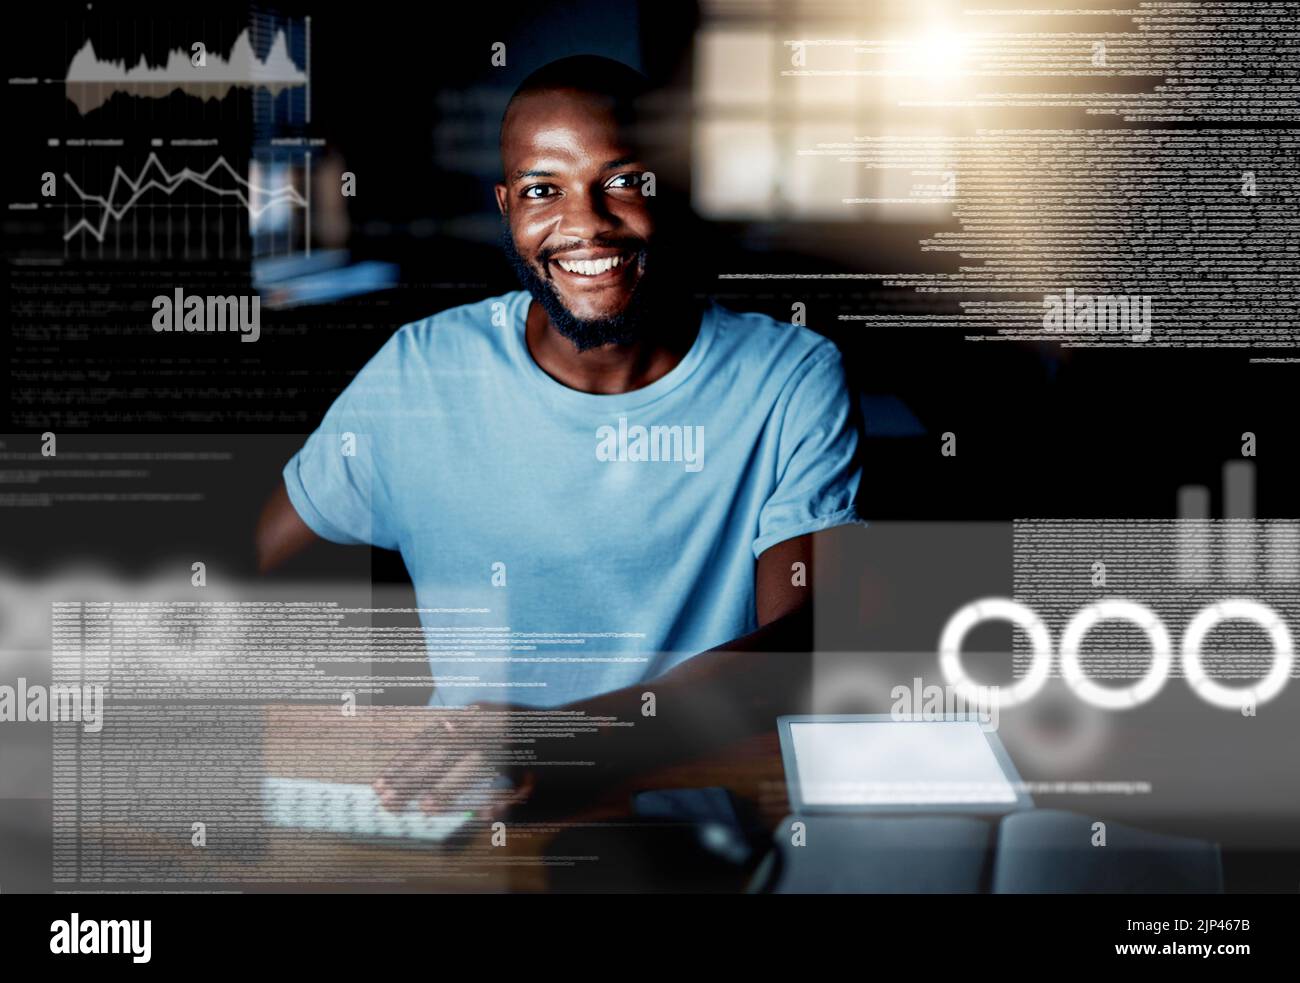 Computer programming, coding and web design with a creative professional in his office with CGI, special effects and digital overlay. Portrait of a Stock Photo